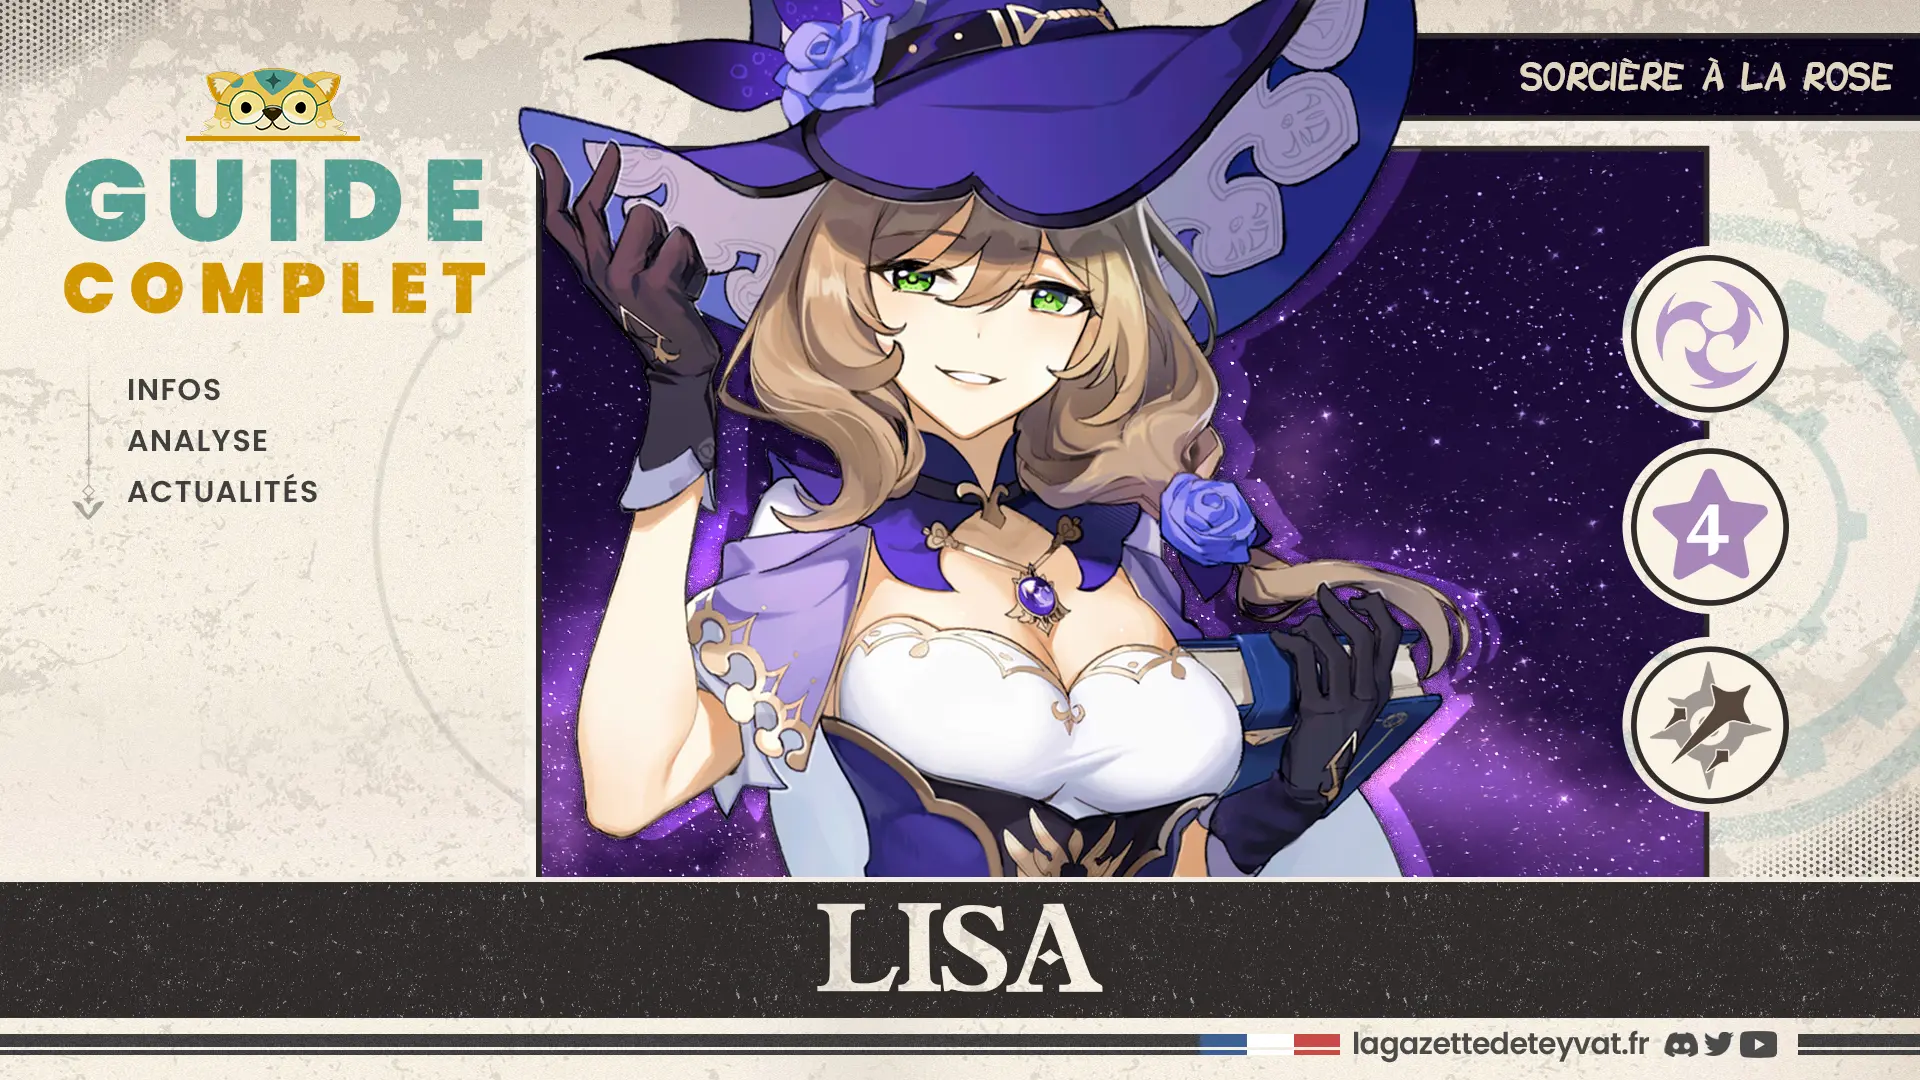 Lisa Genshin Impact, guide complet, farm, build, synergies, rotations